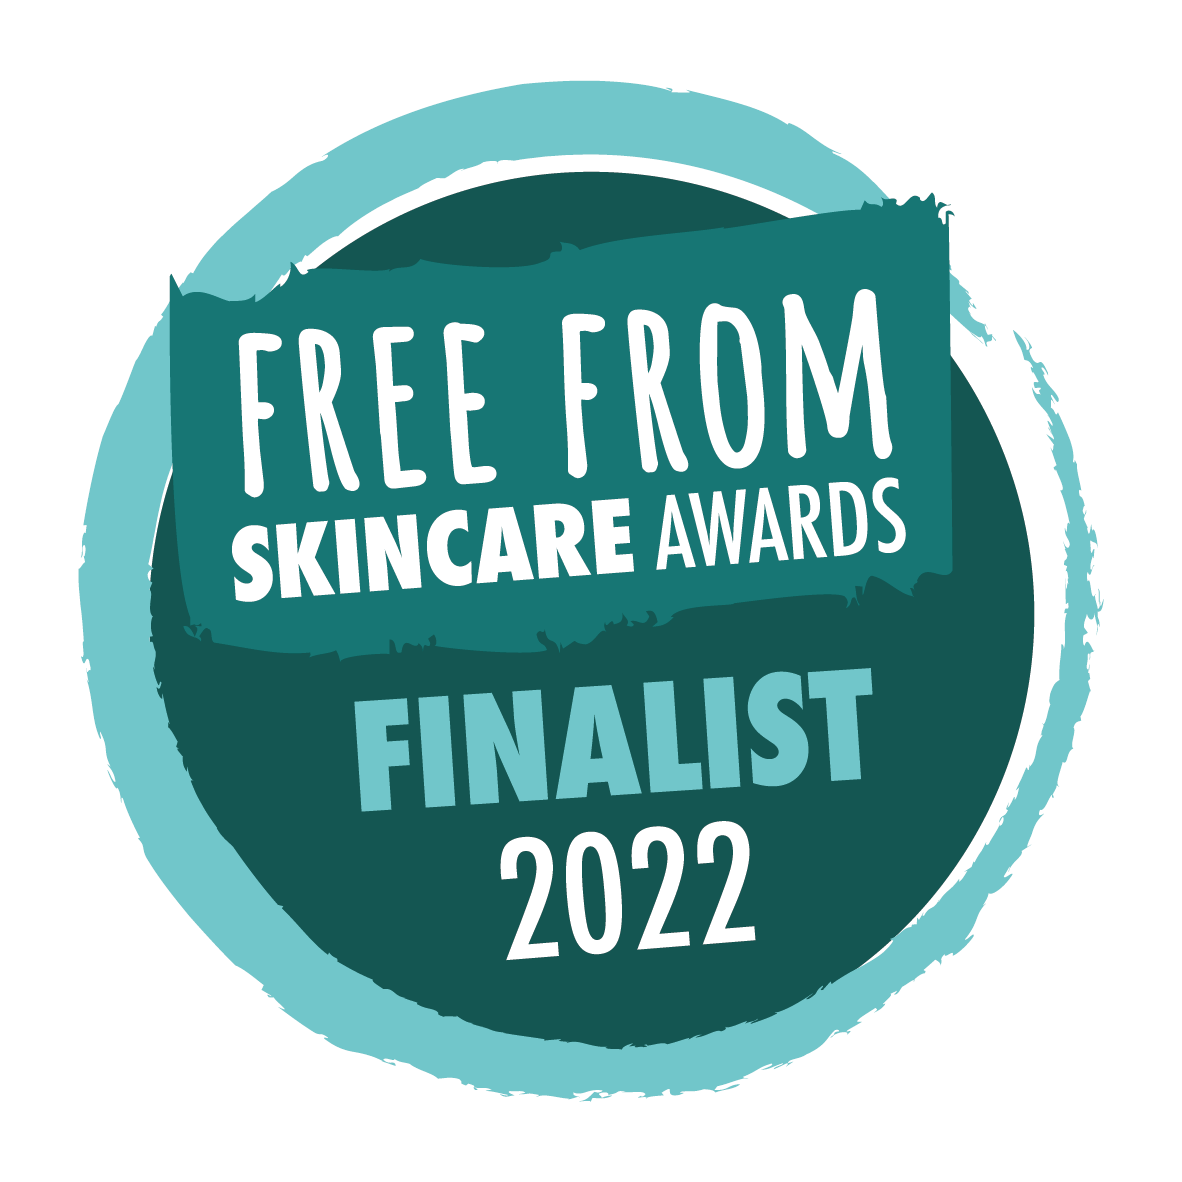 Yay! Excited and honoured to have both #Pamojaskincare entries making the final - bestselling Reset #cleansingbalm and new to the range Replenish #hydratingserum!  #veganskincare #crueltyfreeskincare #skincareover40